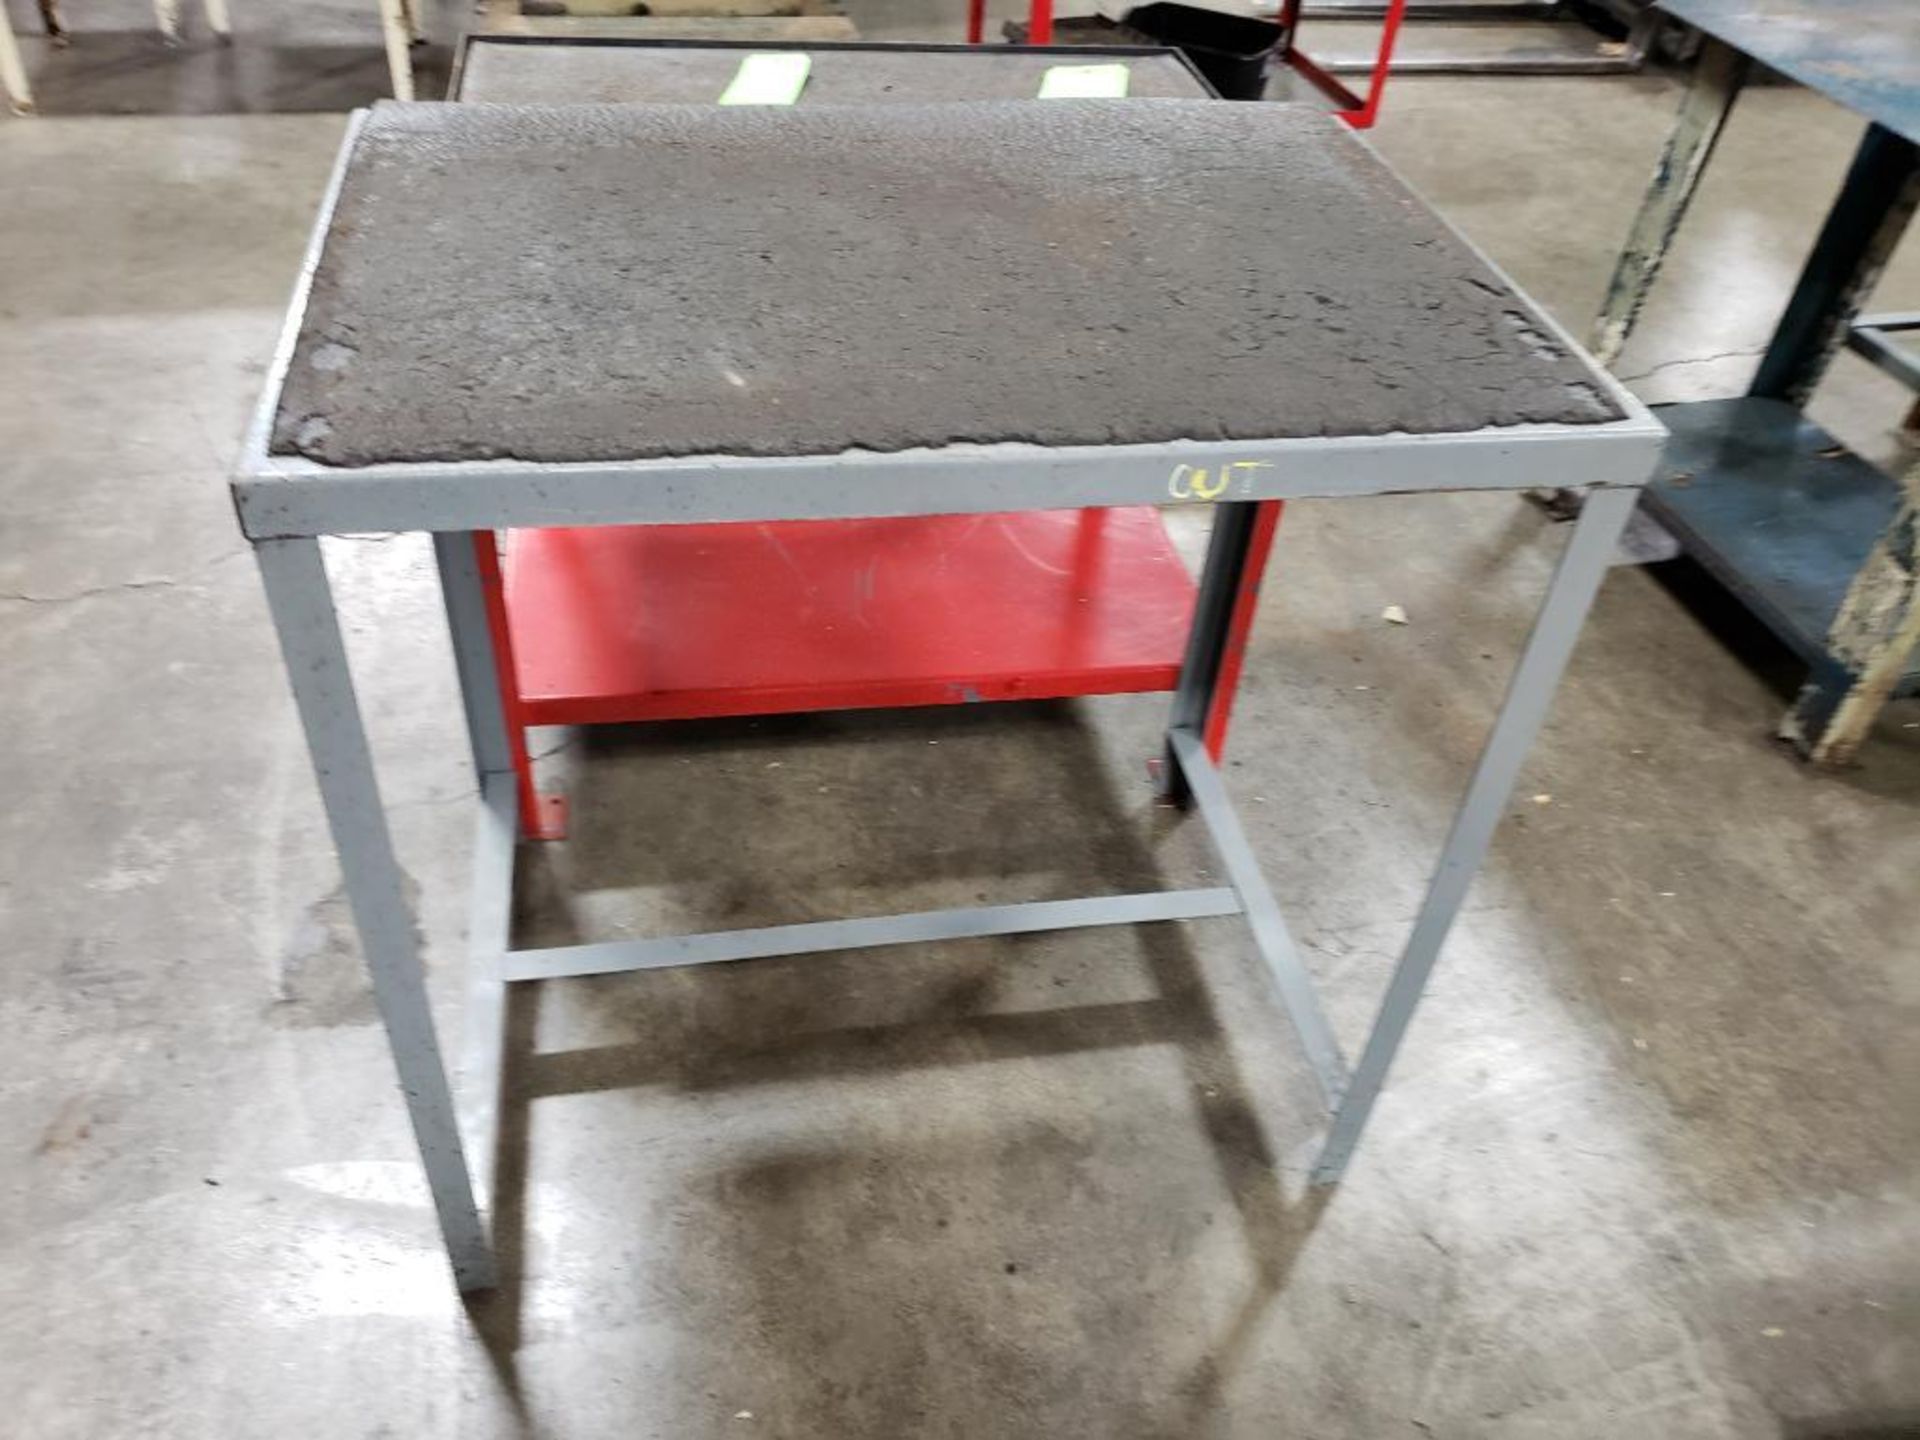 Qty 2 - Industrial work table. 36x24x36, 36x24x31 WxDxH. - Image 2 of 3